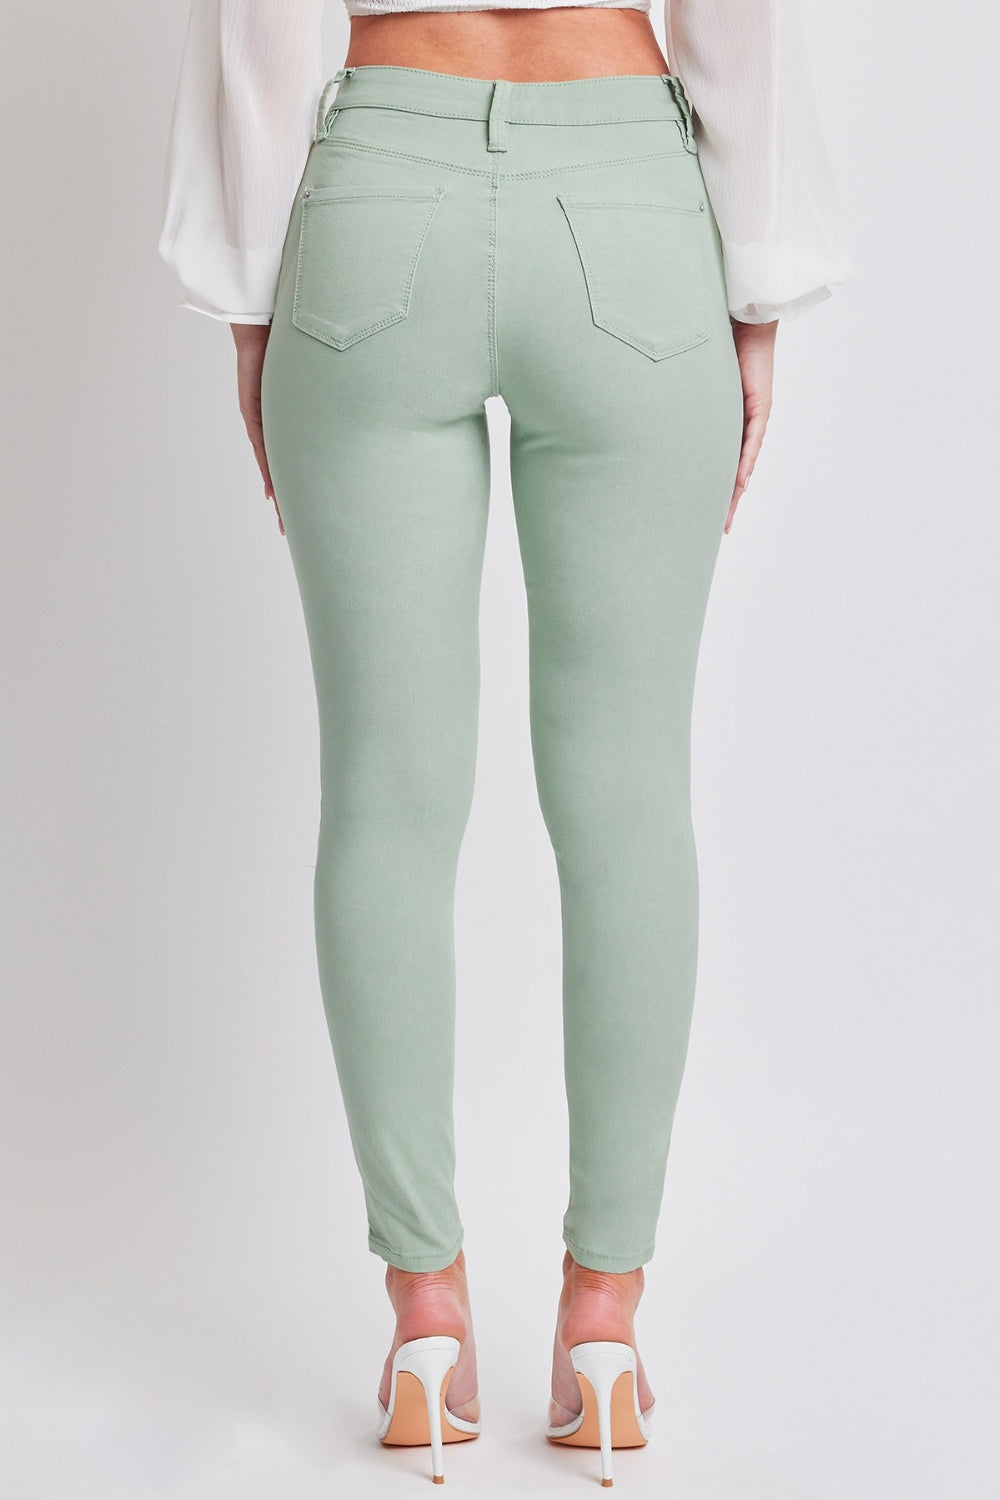 YMI Hyperstretch Mid-Rise Skinny Jeans in Jade